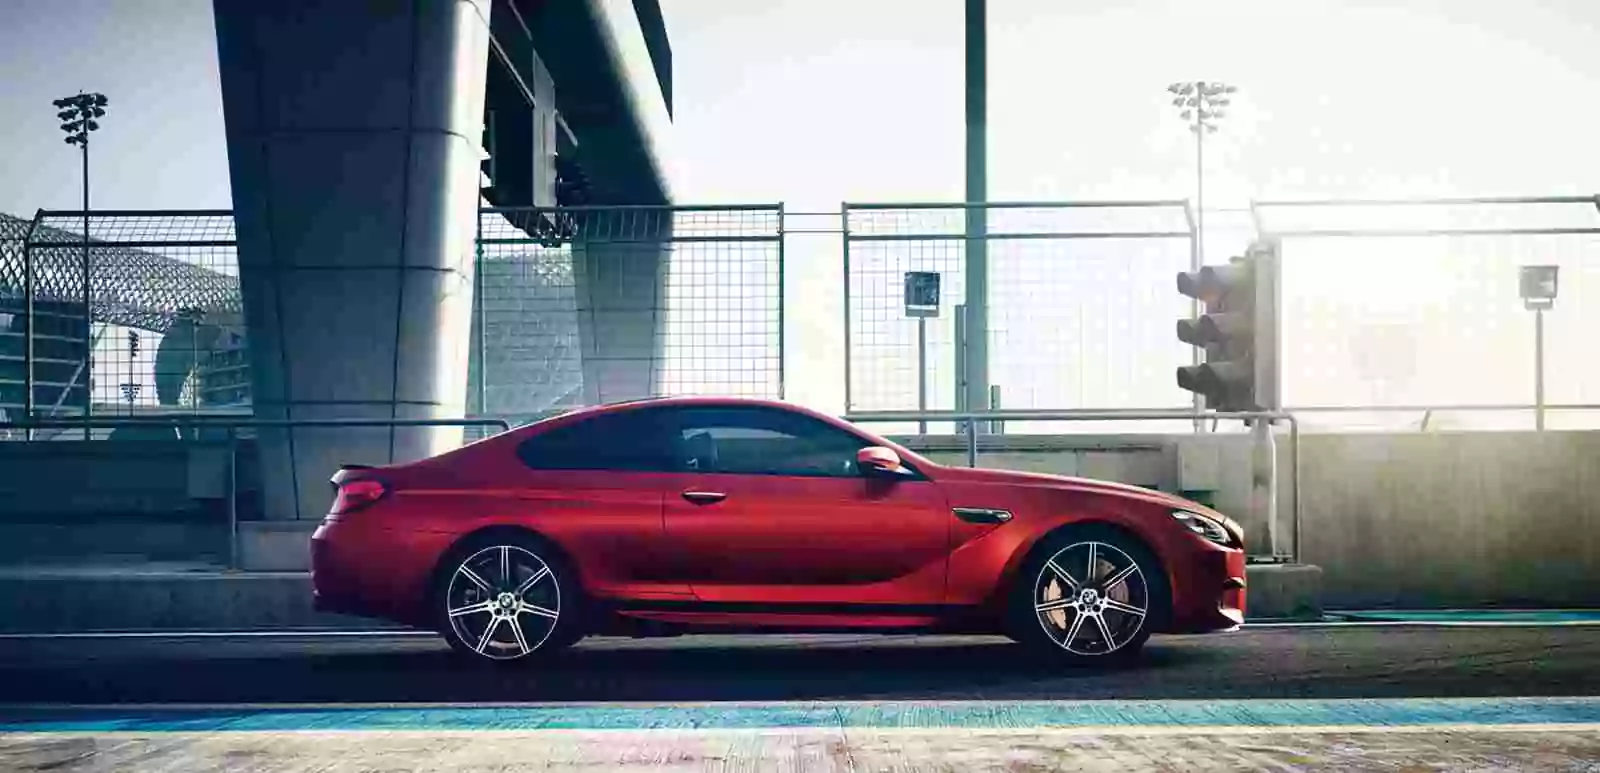 Hire A BMW M6 For An Hour In Dubai 